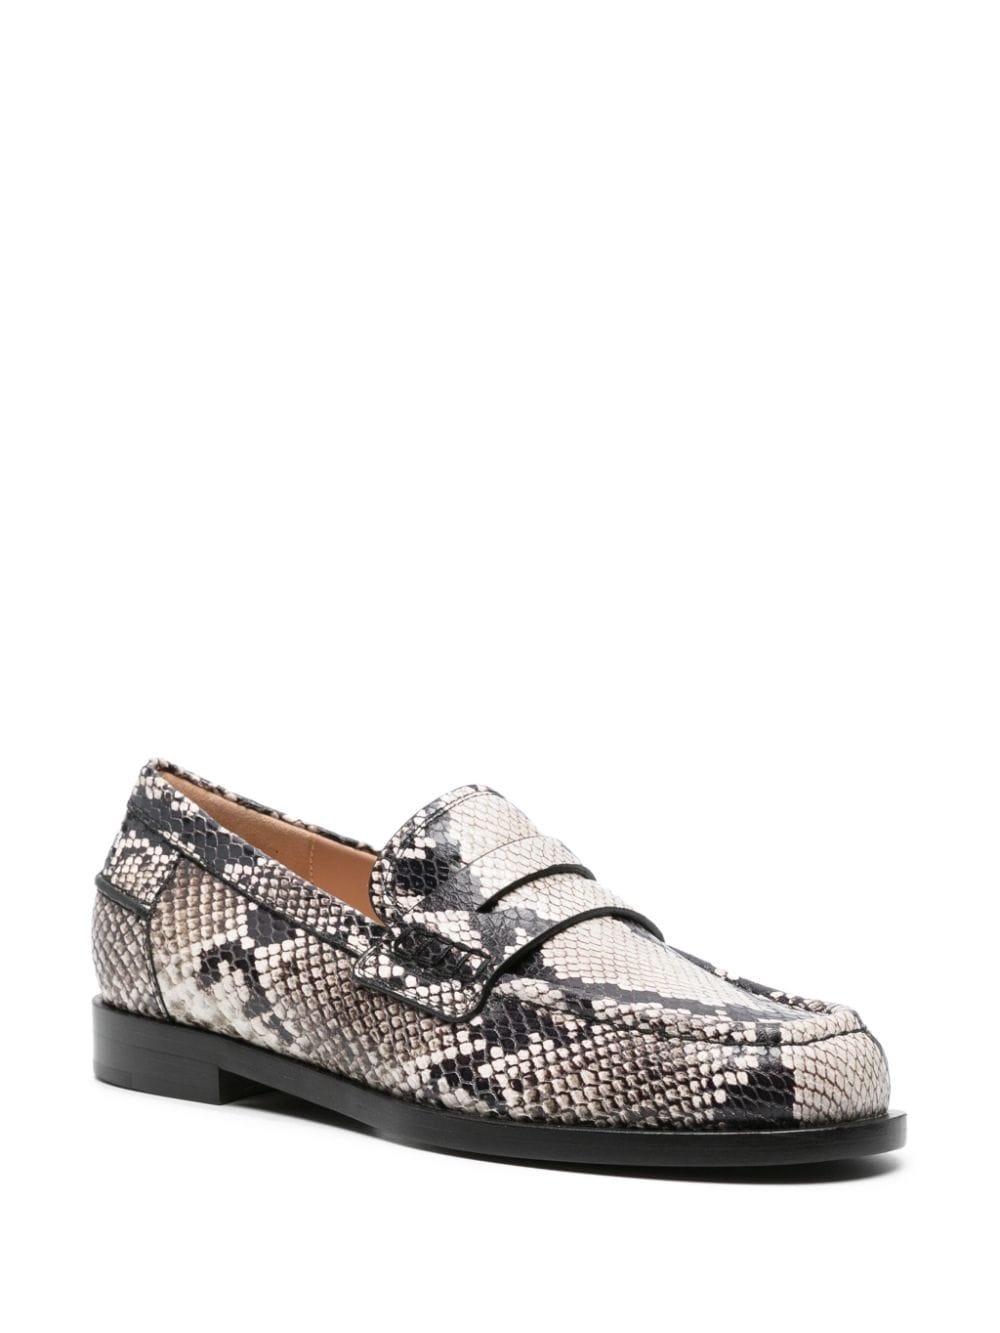 Borneo snake-effect leather loafers - 2